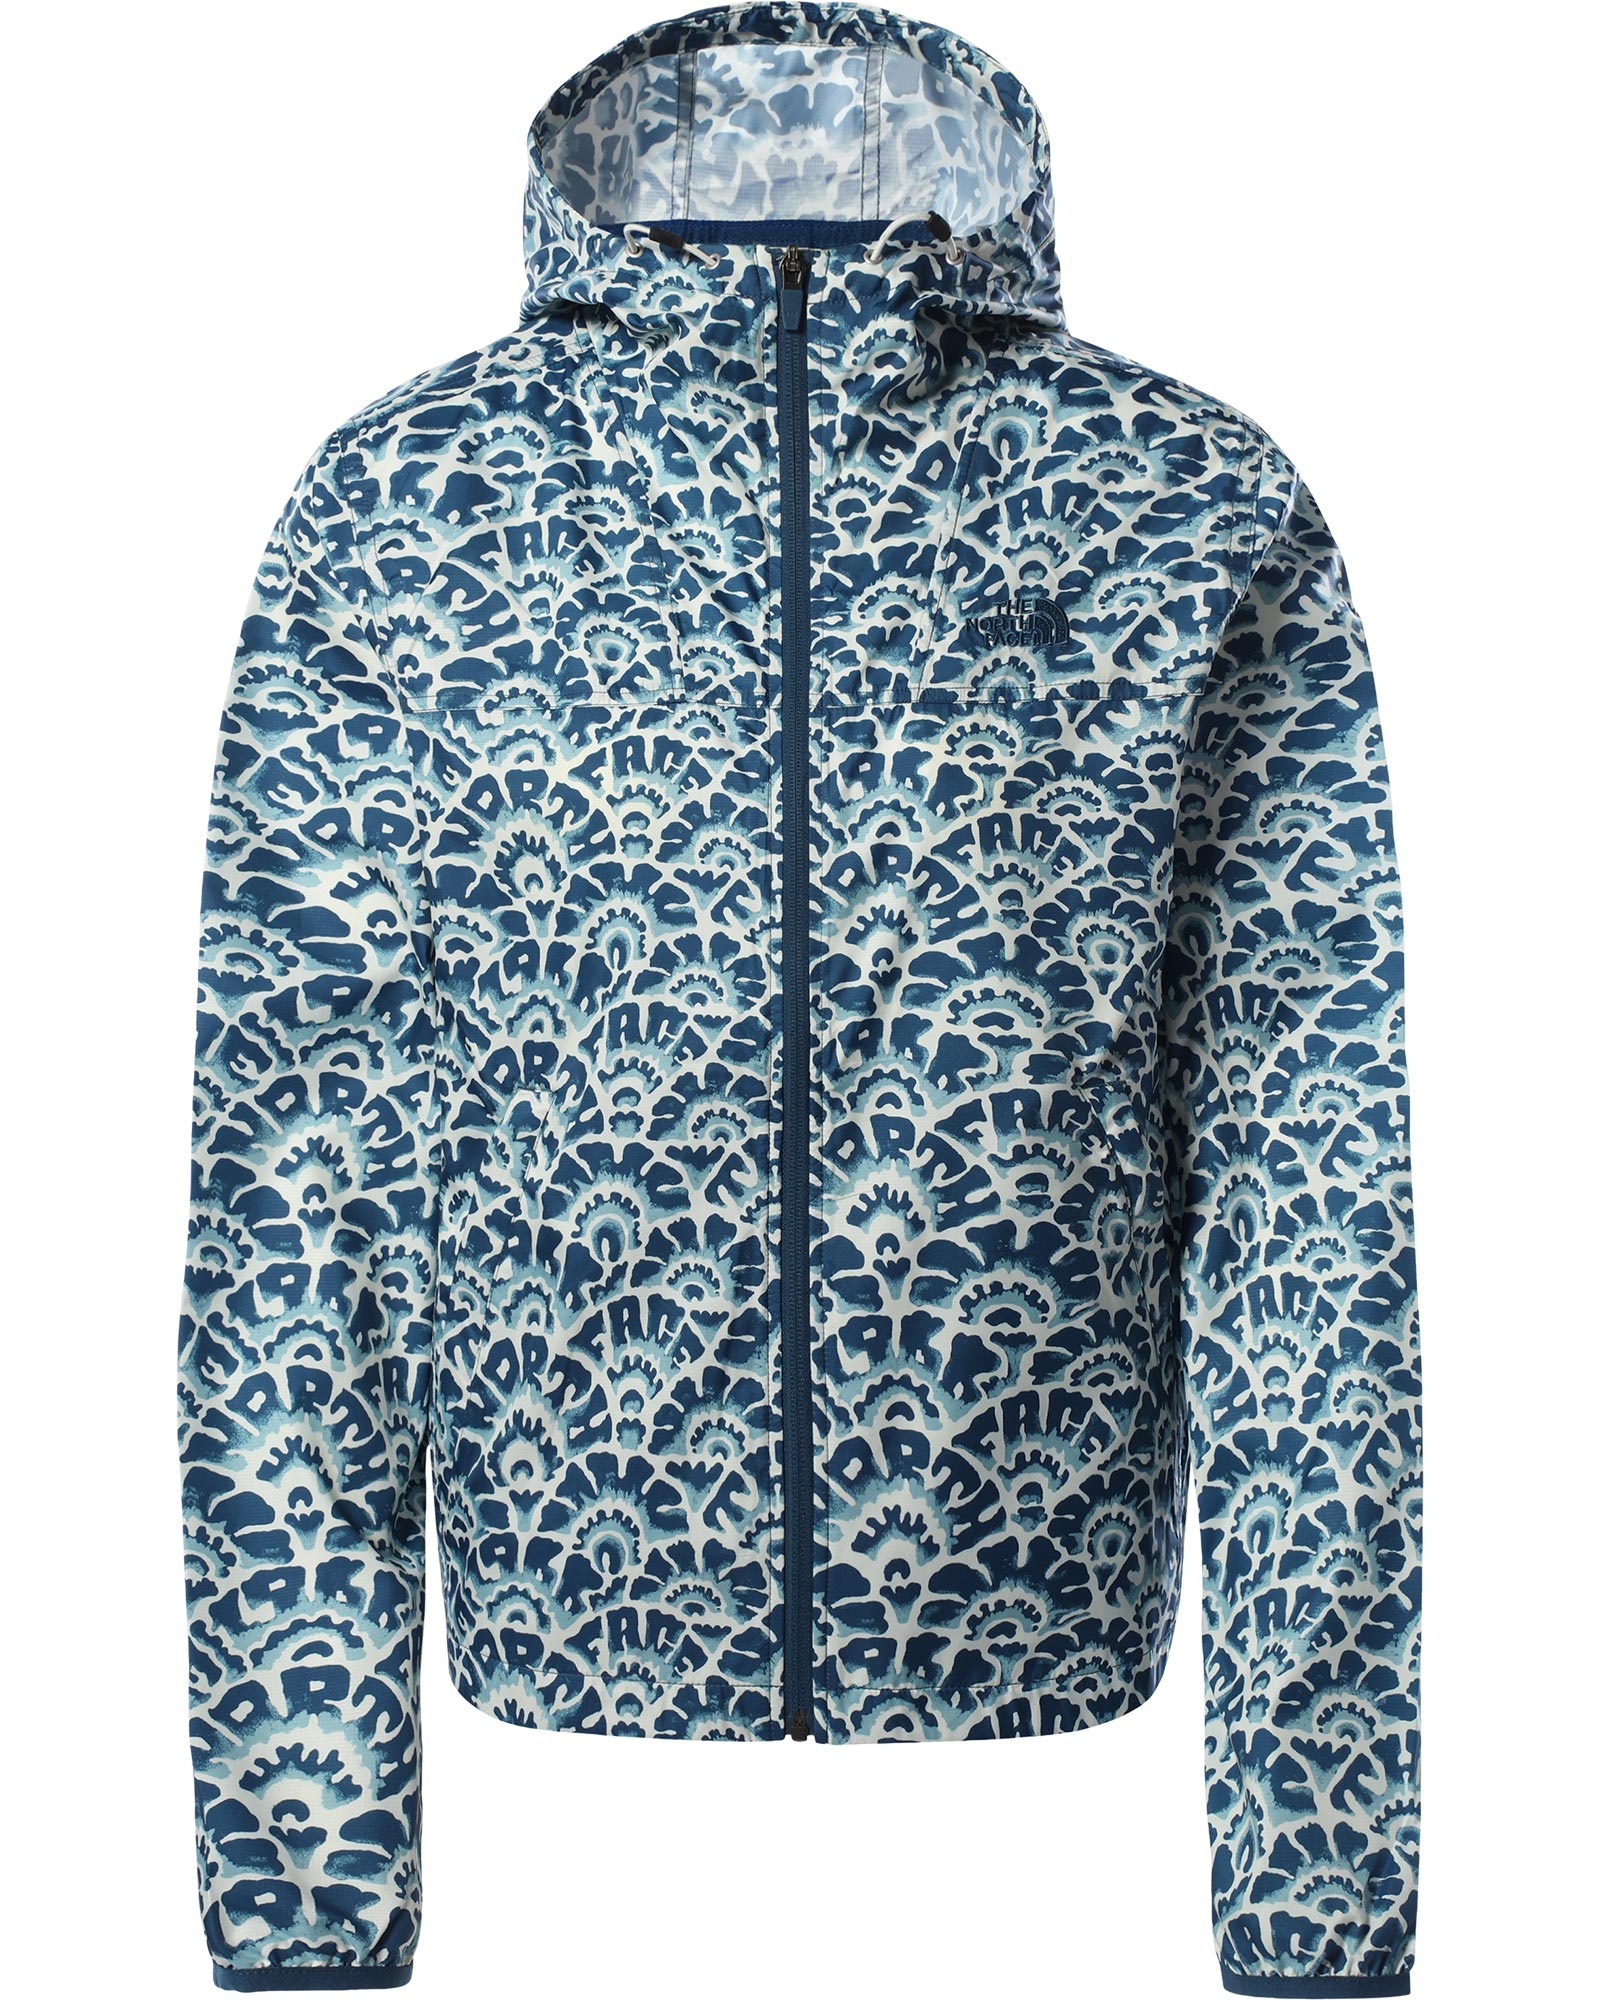 The North Face Cyclone Women’s Jacket - Monterey Blue Print M